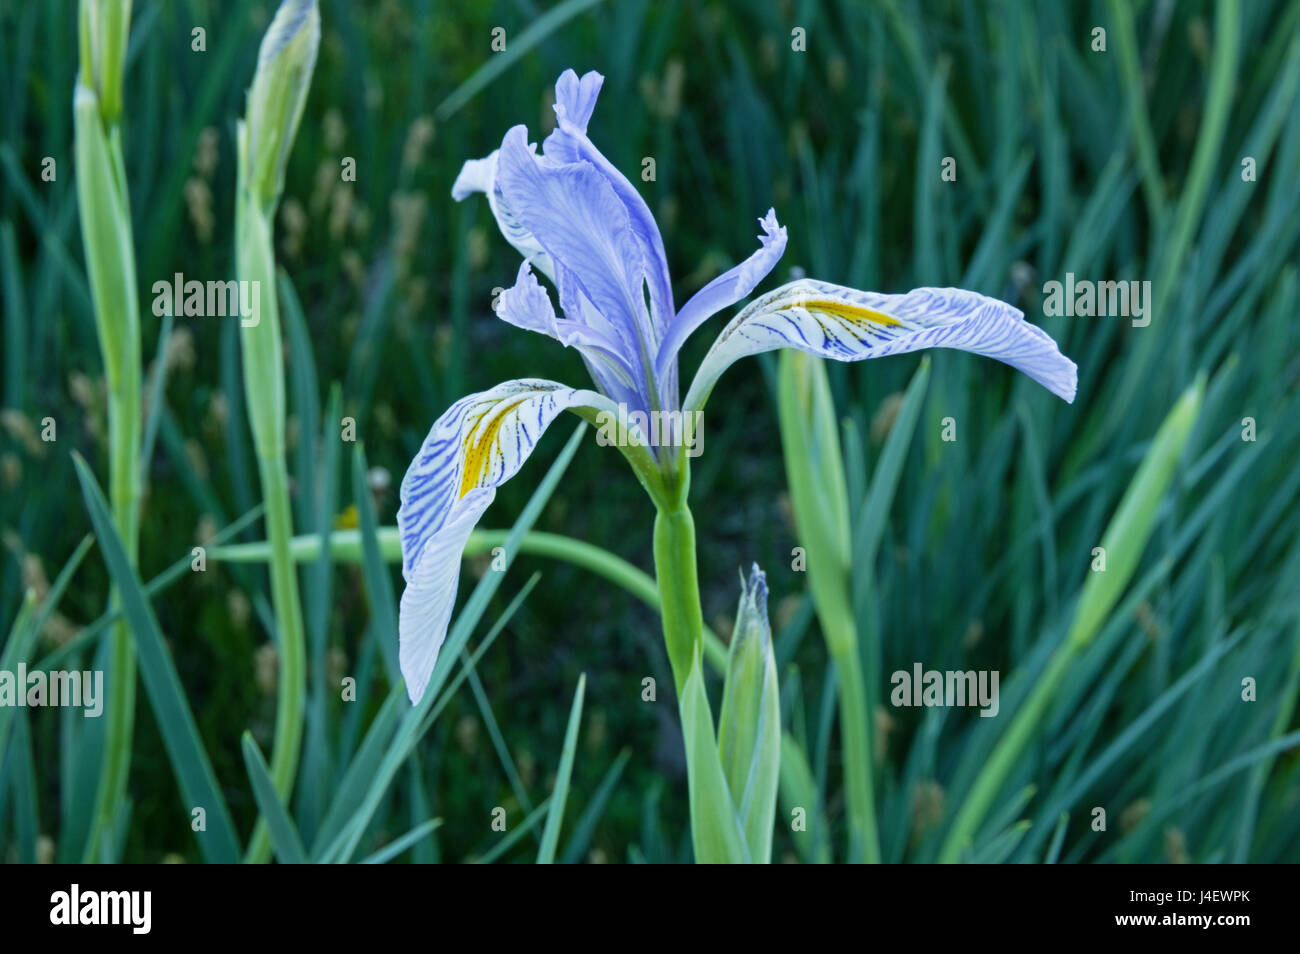 wild iris flower with out of focus leaves and stalks Stock Photo